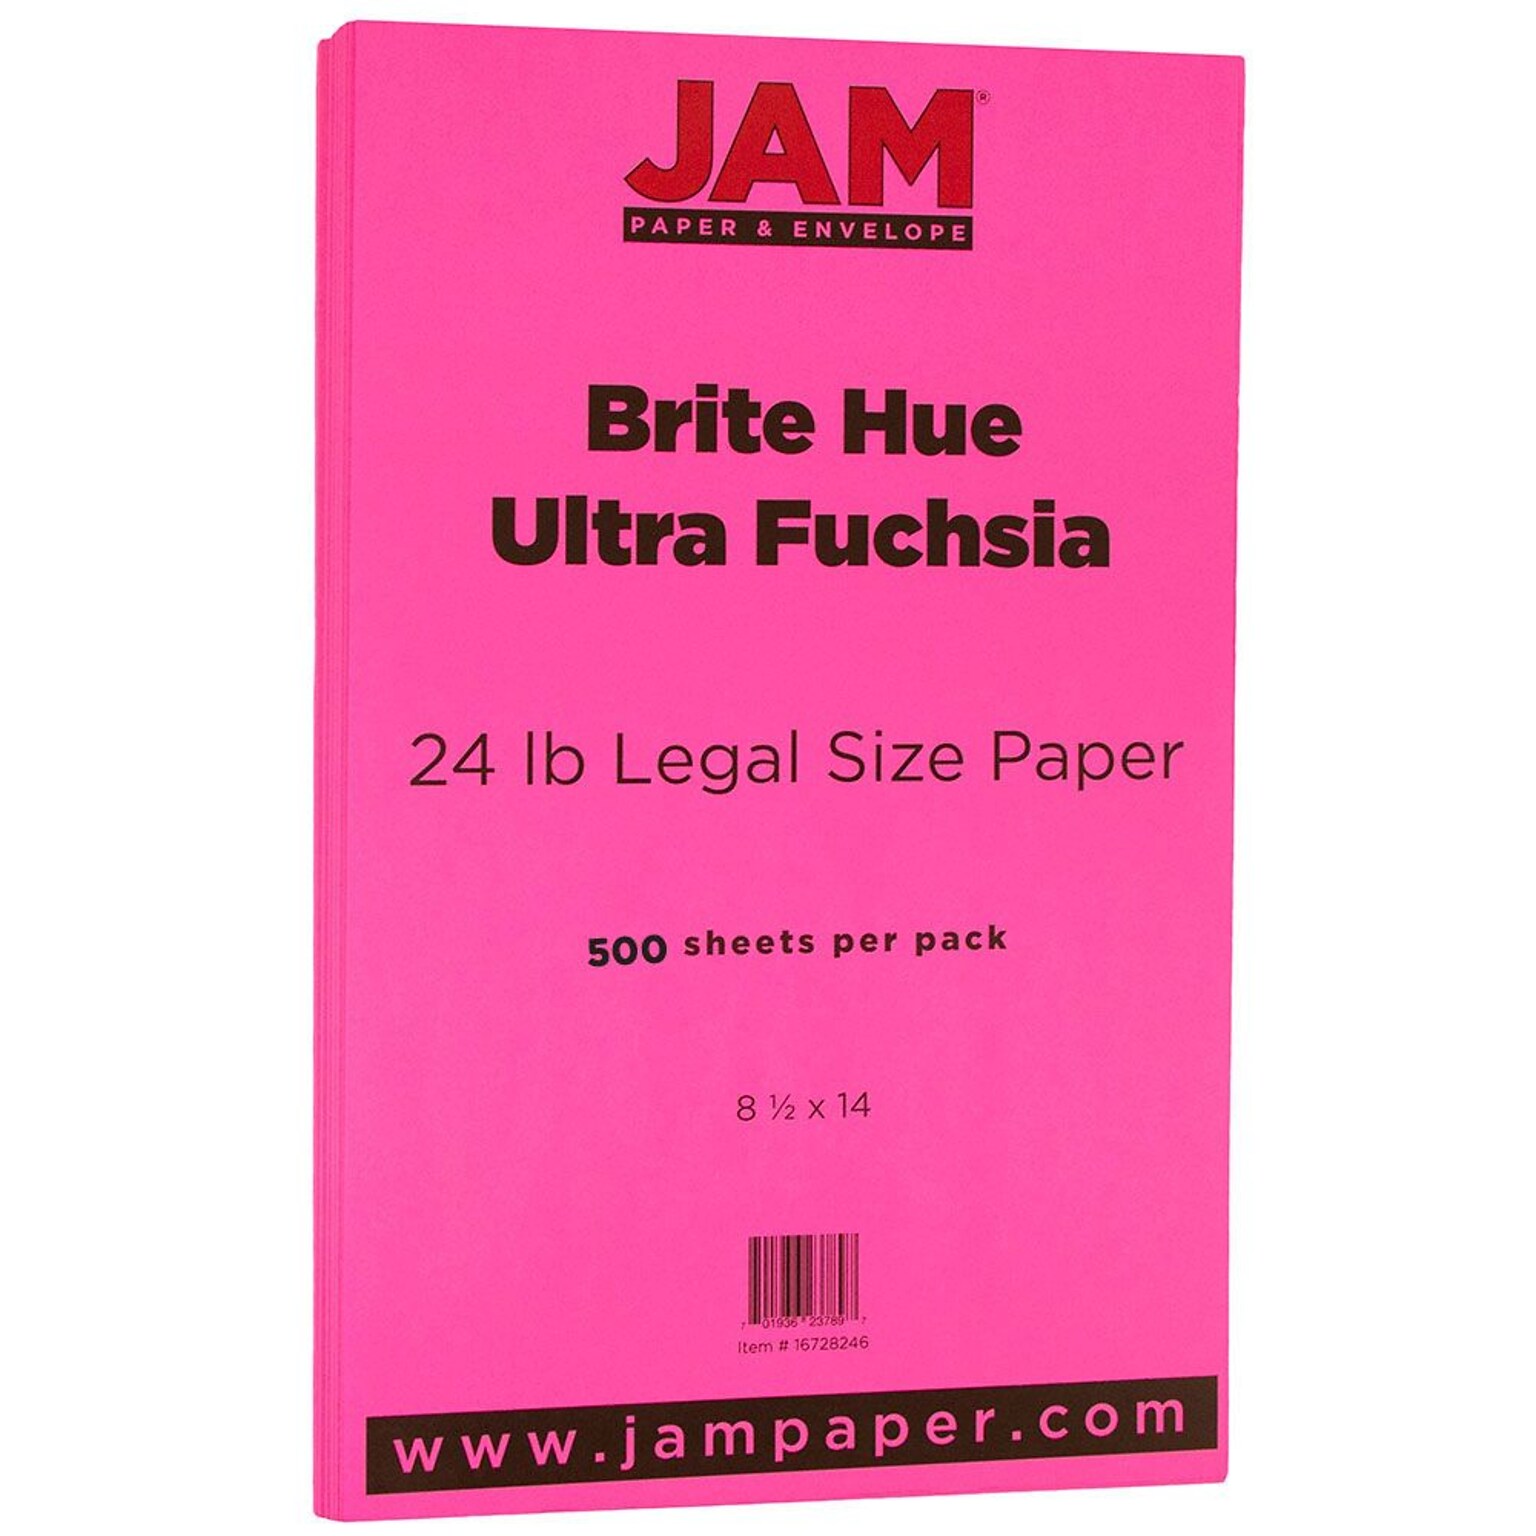 JAM Paper Smooth Colored 8.5 x 14 Color Copy Paper, 24 lbs., Fuchsia Pink, 500 Sheets/Ream (16728246B)